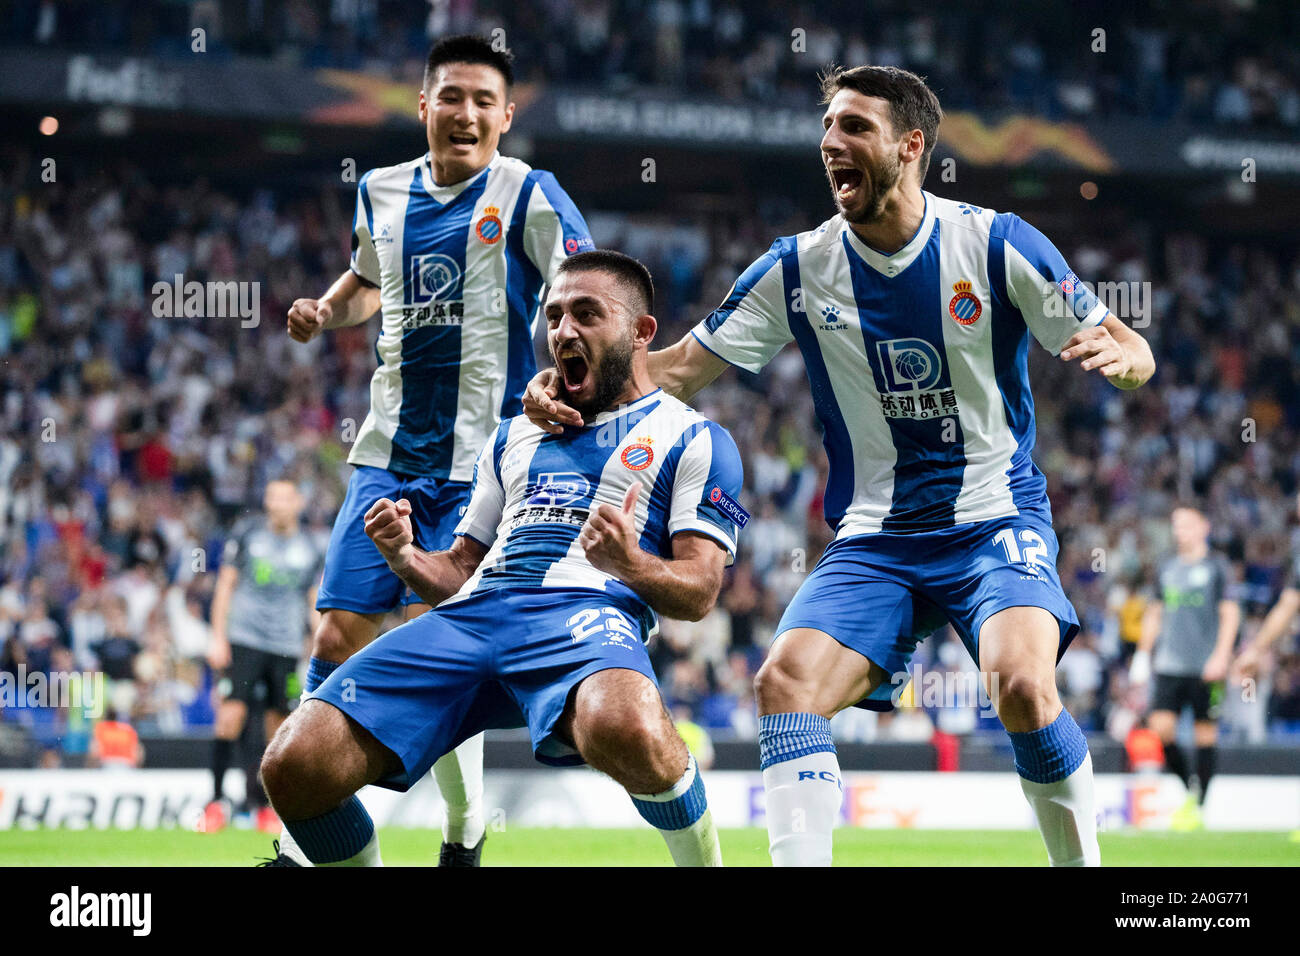 Barcelona, Spain. 19th Sep, 2019. Espanyol's Matias Vargas (C) celebrates his goal with Wu Lei (L) and Jonathan Calleri during a UEFA Europa League Group H soccer match between Spanish team RCD Espanyol and Hungarian team Ferencvaros in Barcelona, Spain, Sept. 19, 2019. Credit: Joan Gosa/Xinhua/Alamy Live News Stock Photo